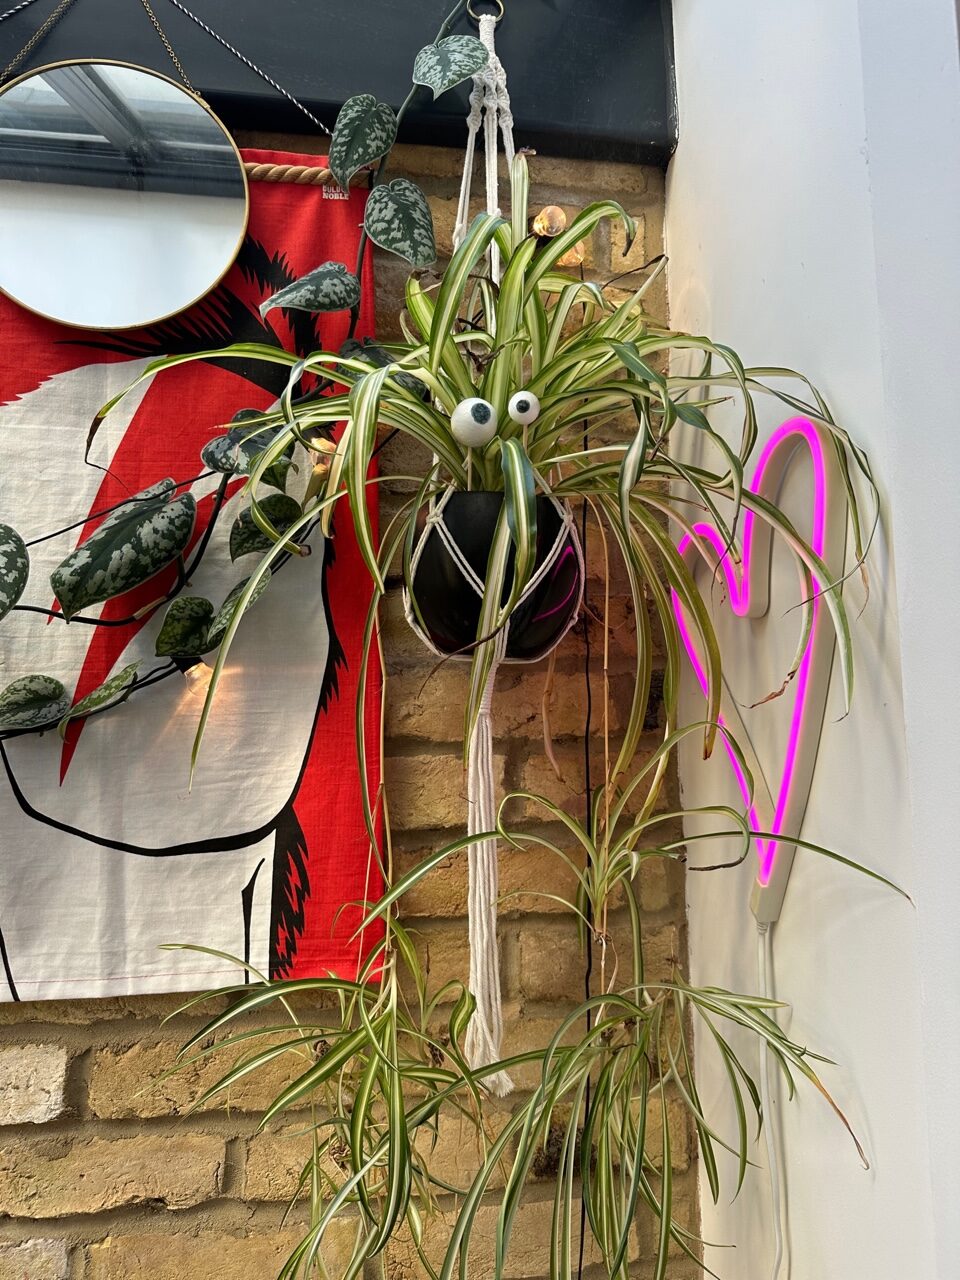 Making an eye for your spider plant